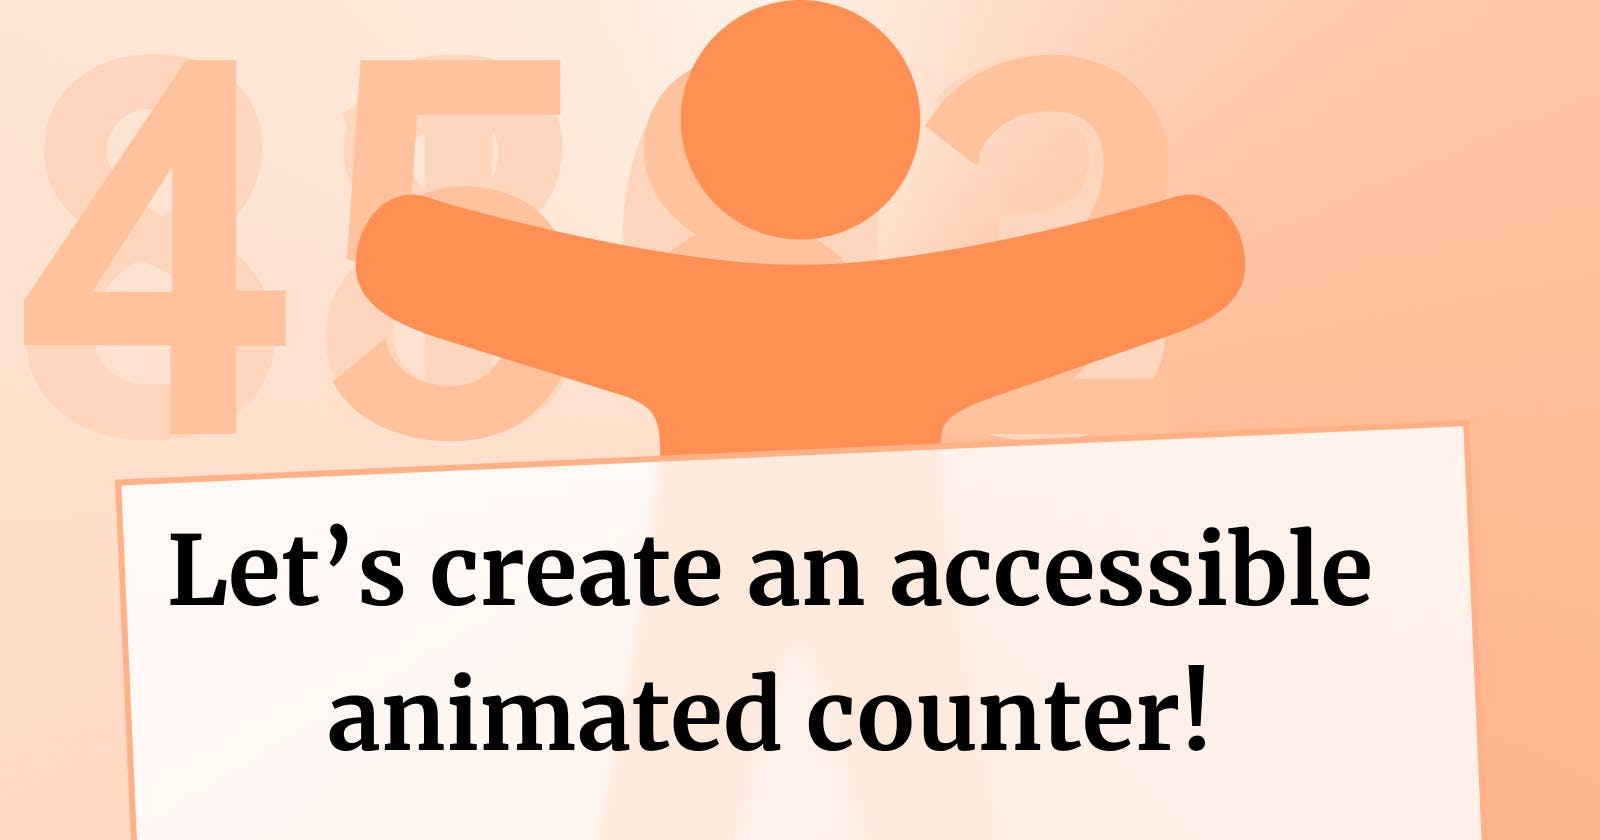 Let's create an accessible animated counter! 🔢 ♿️